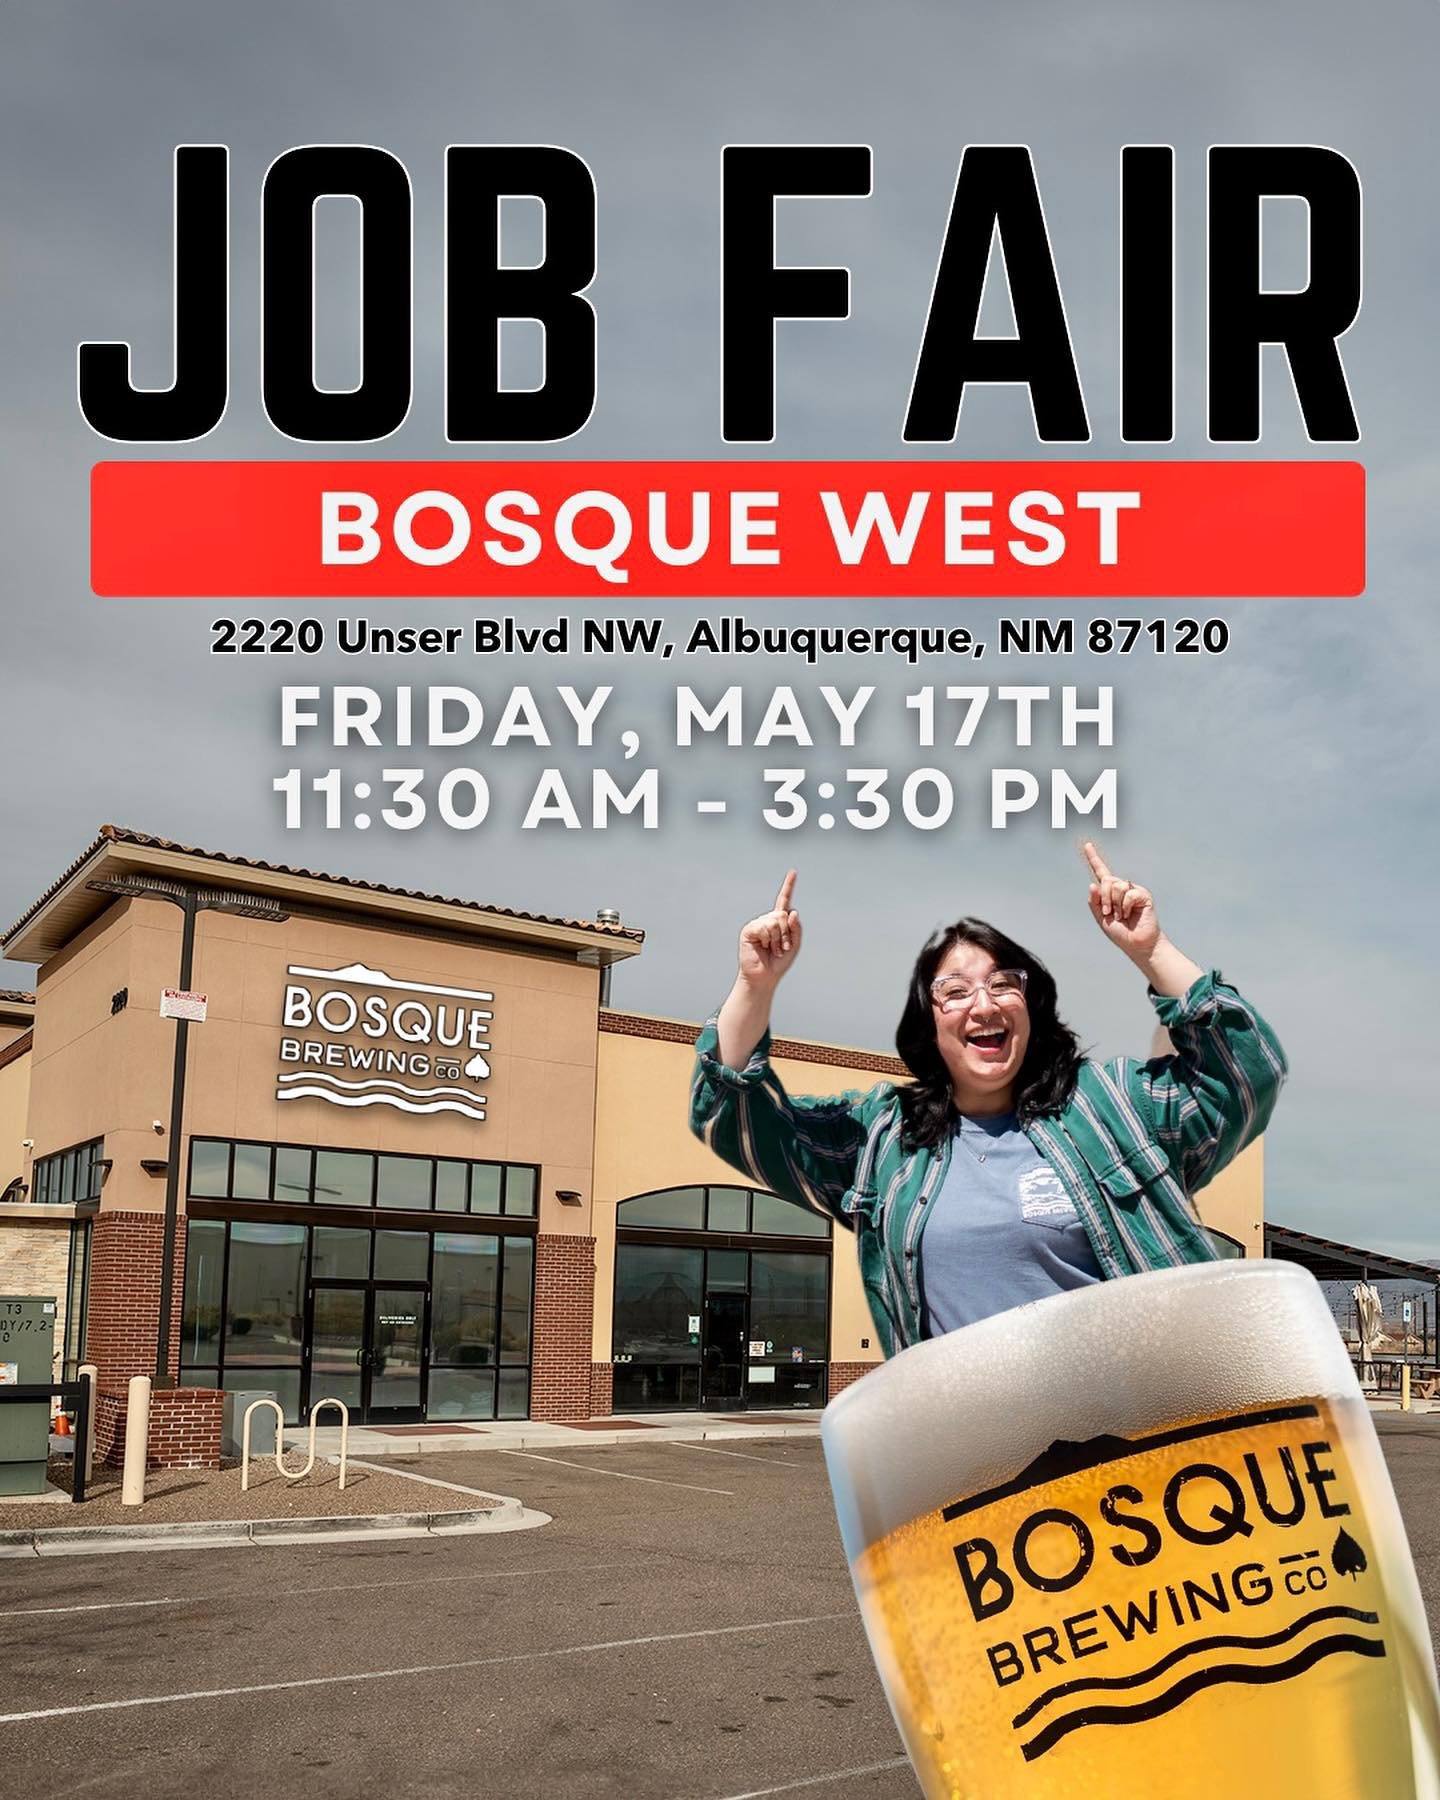 BOSQUE WEST JOB FAIR🚨

Hey there, Bosque Brewing fam! 🍻 It&rsquo;s Audrey, your go-to gal for all things recruiting and experience at Bosque Brewing Co.! We&rsquo;ve got some exciting news brewing! We&rsquo;re hosting a Job Fair at Bosque West (222